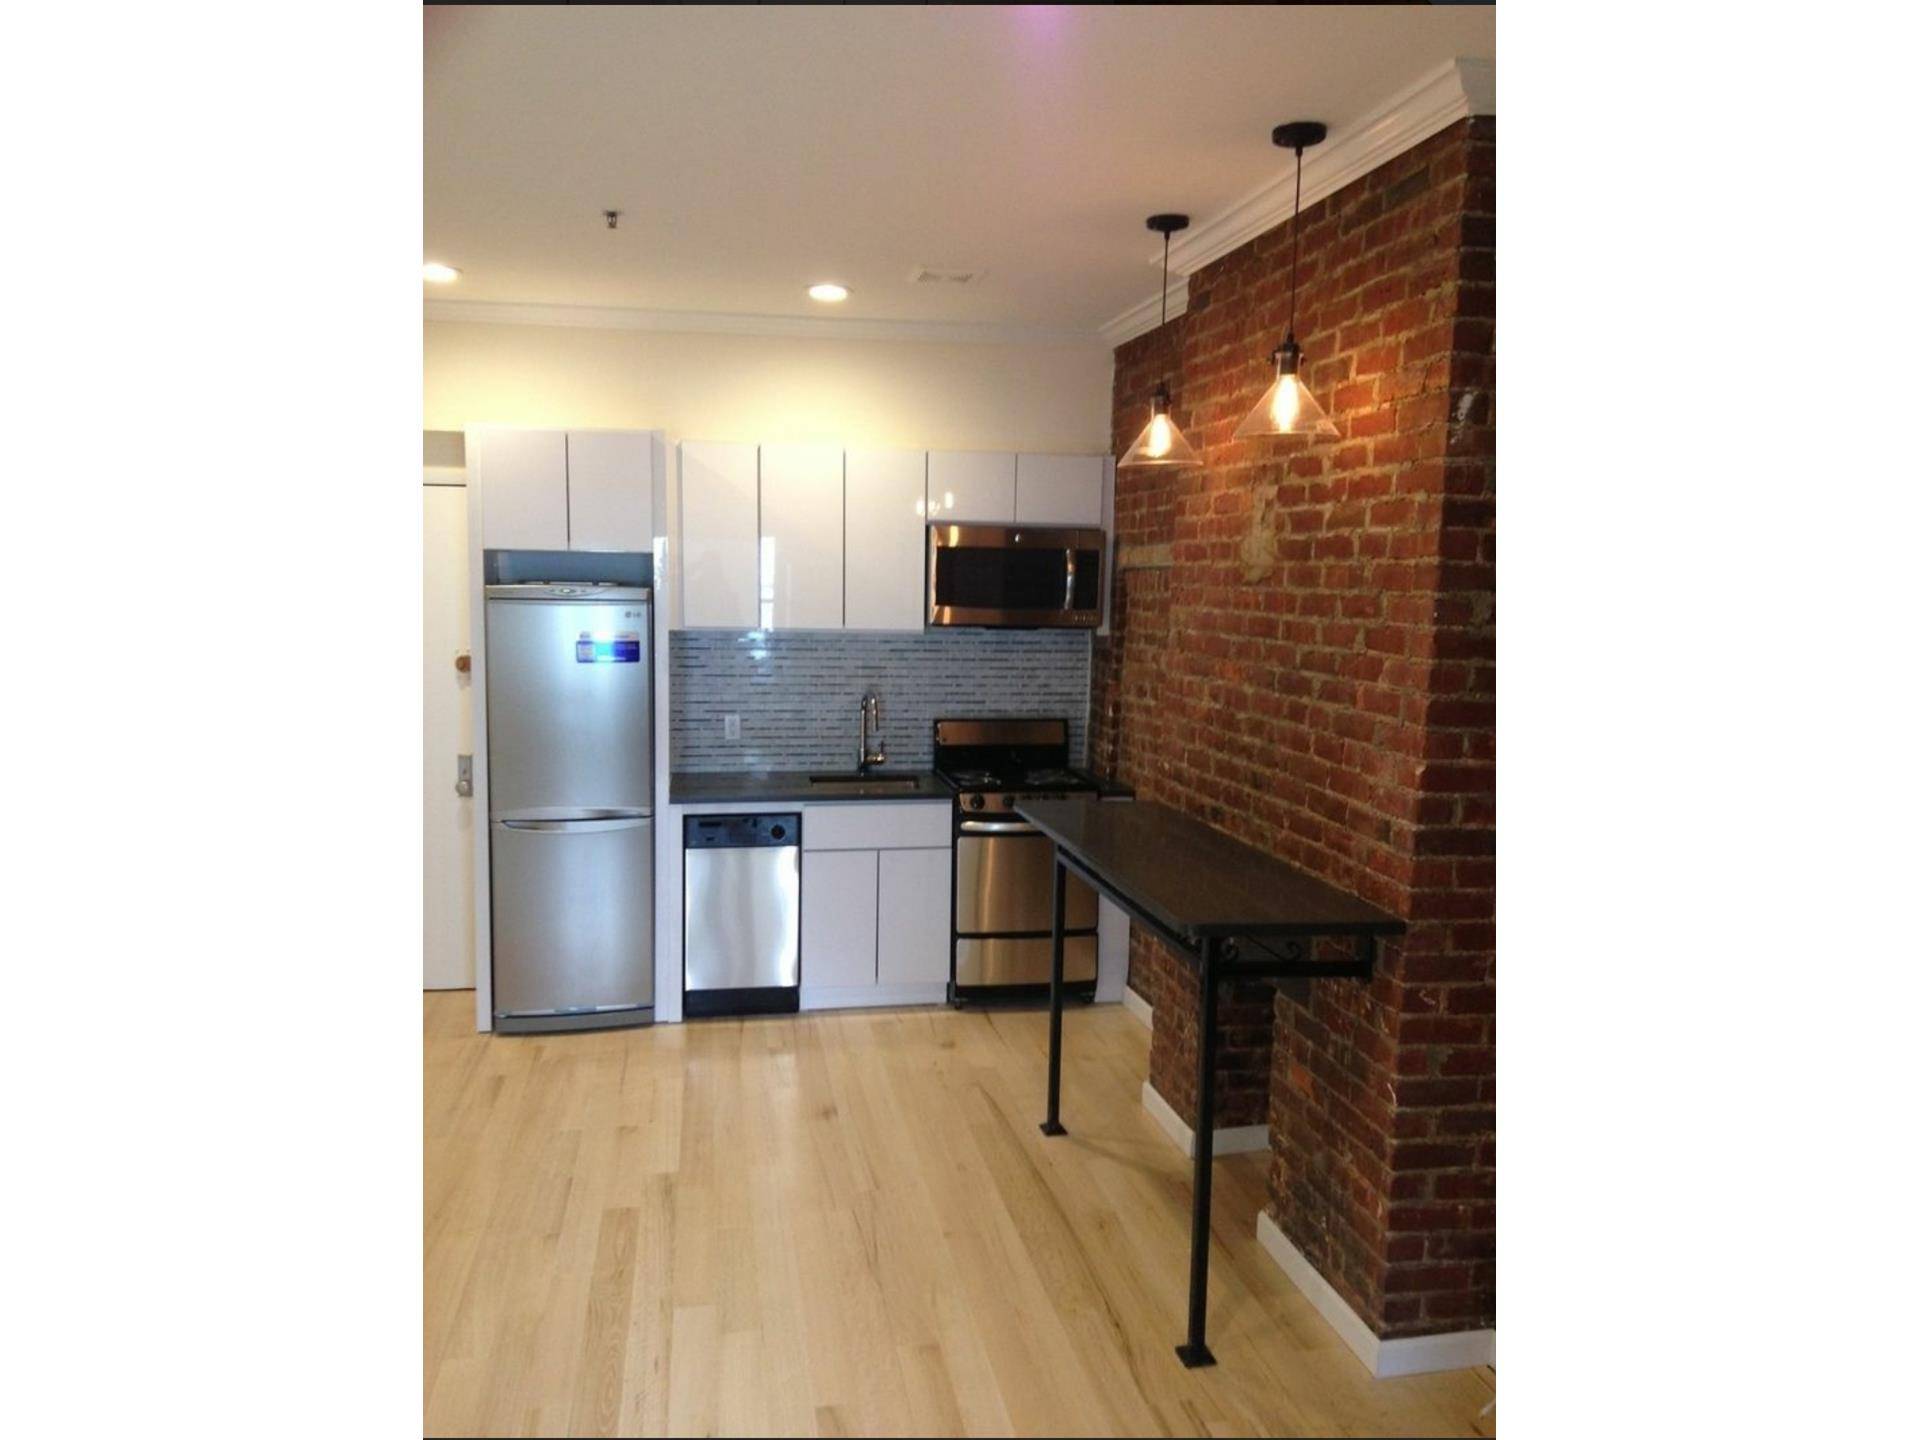 Spacious 3 bedroom apartment is available in the heart of midtown west.